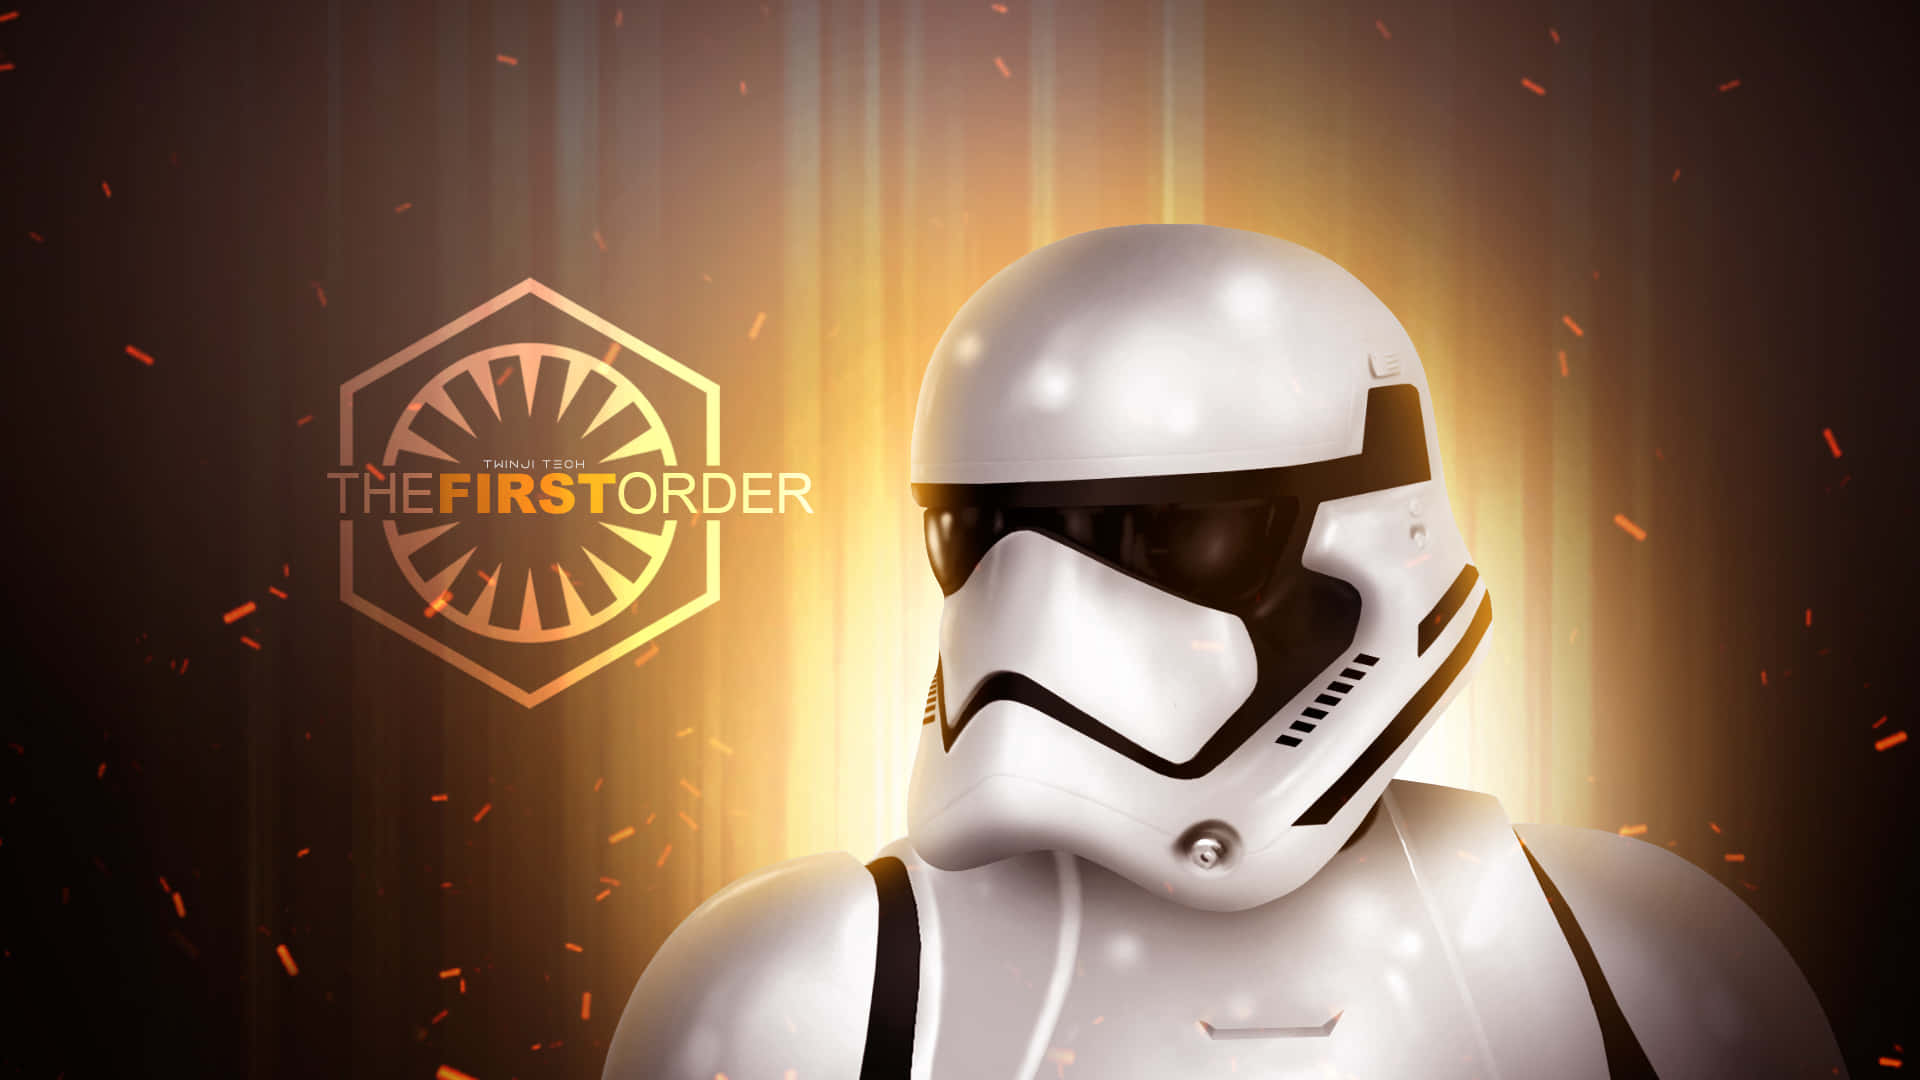 First Order Stormtroopers prepare for battle Wallpaper